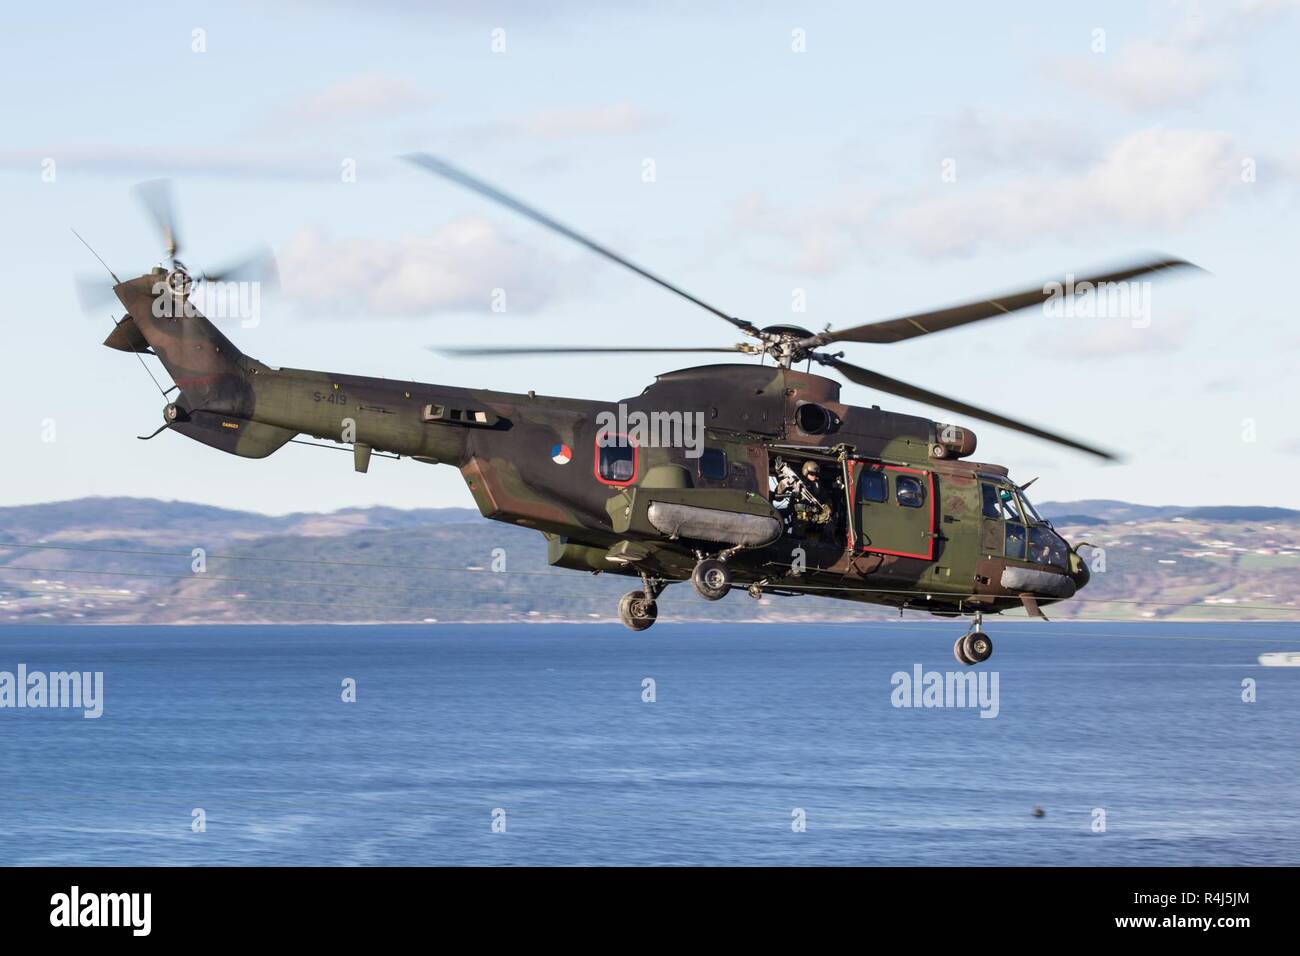 A Dutch AS532 Super Puma helicopter securities the landing of infantrymen  on the beach of Trondheim Fjord, in Norway, during exercise Trident  Juncture 18. With around 50,000 personnel participating in Trident Juncture